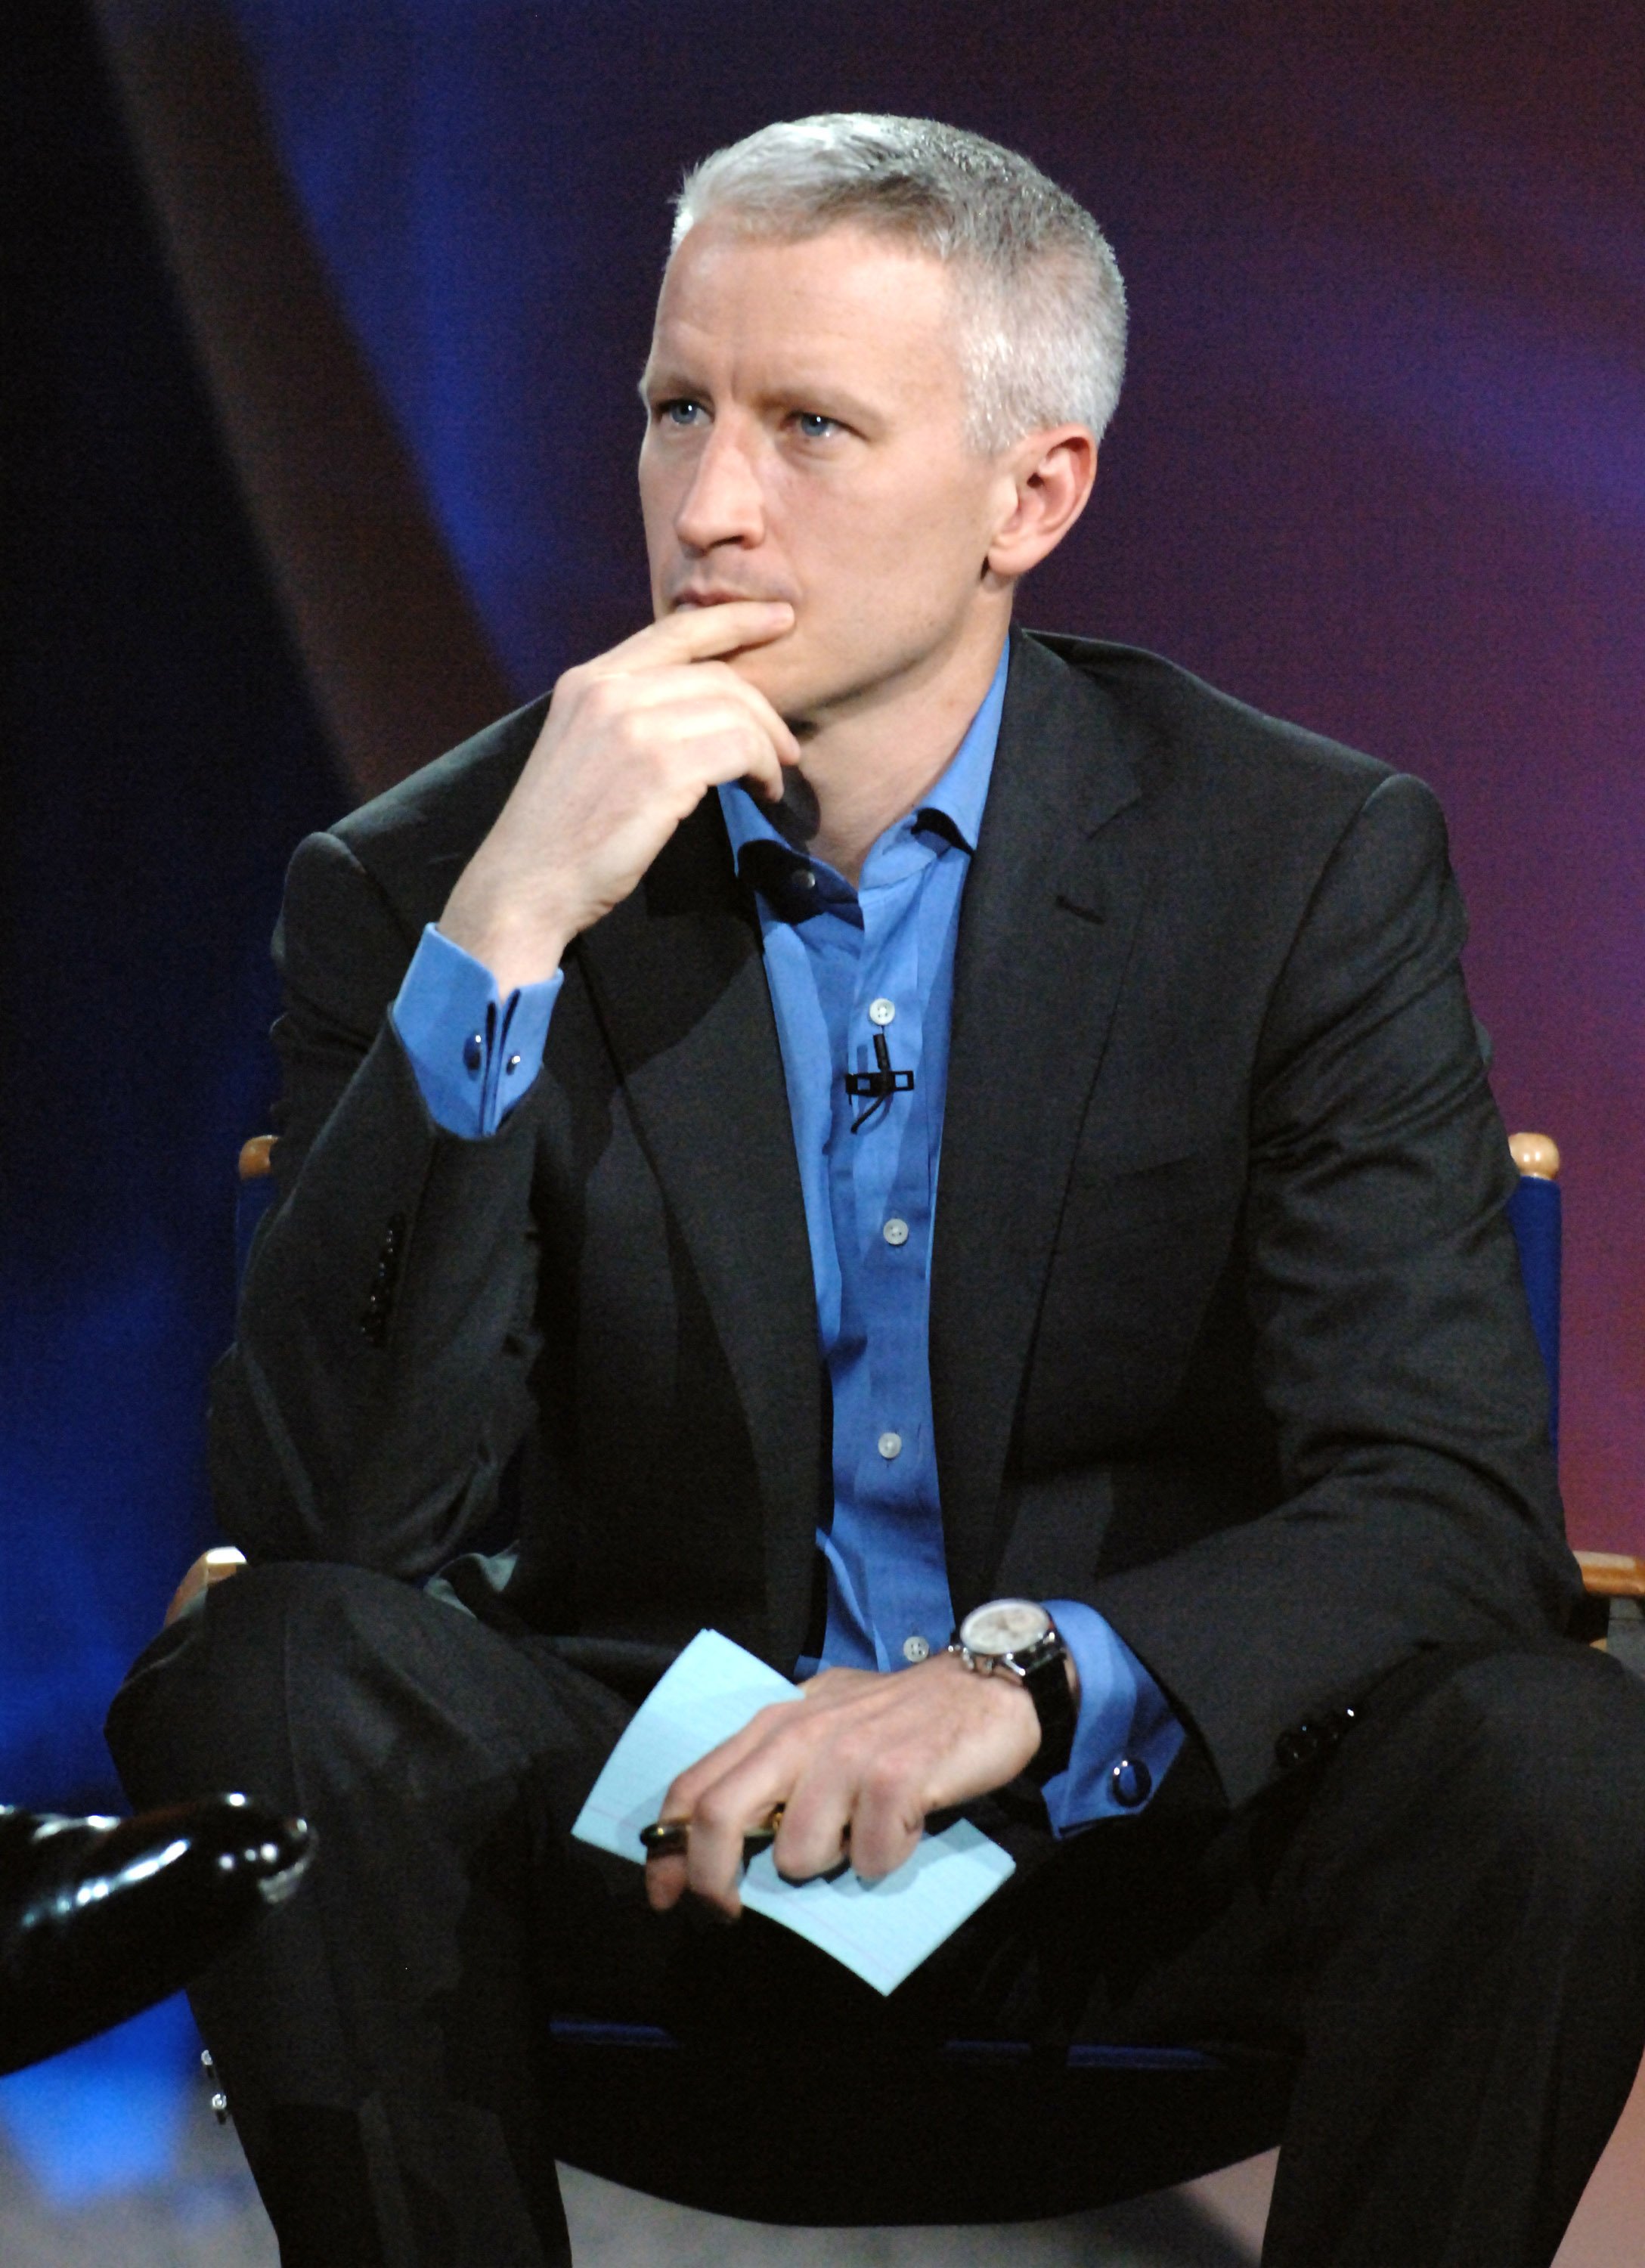 Anderson Cooper during The Comedy Festival - Honoring: Jerry Seinfeld - Show at Palace Ballroom at Caesars Palace in Las Vegas, Nevada, United States | Source: Getty Images 